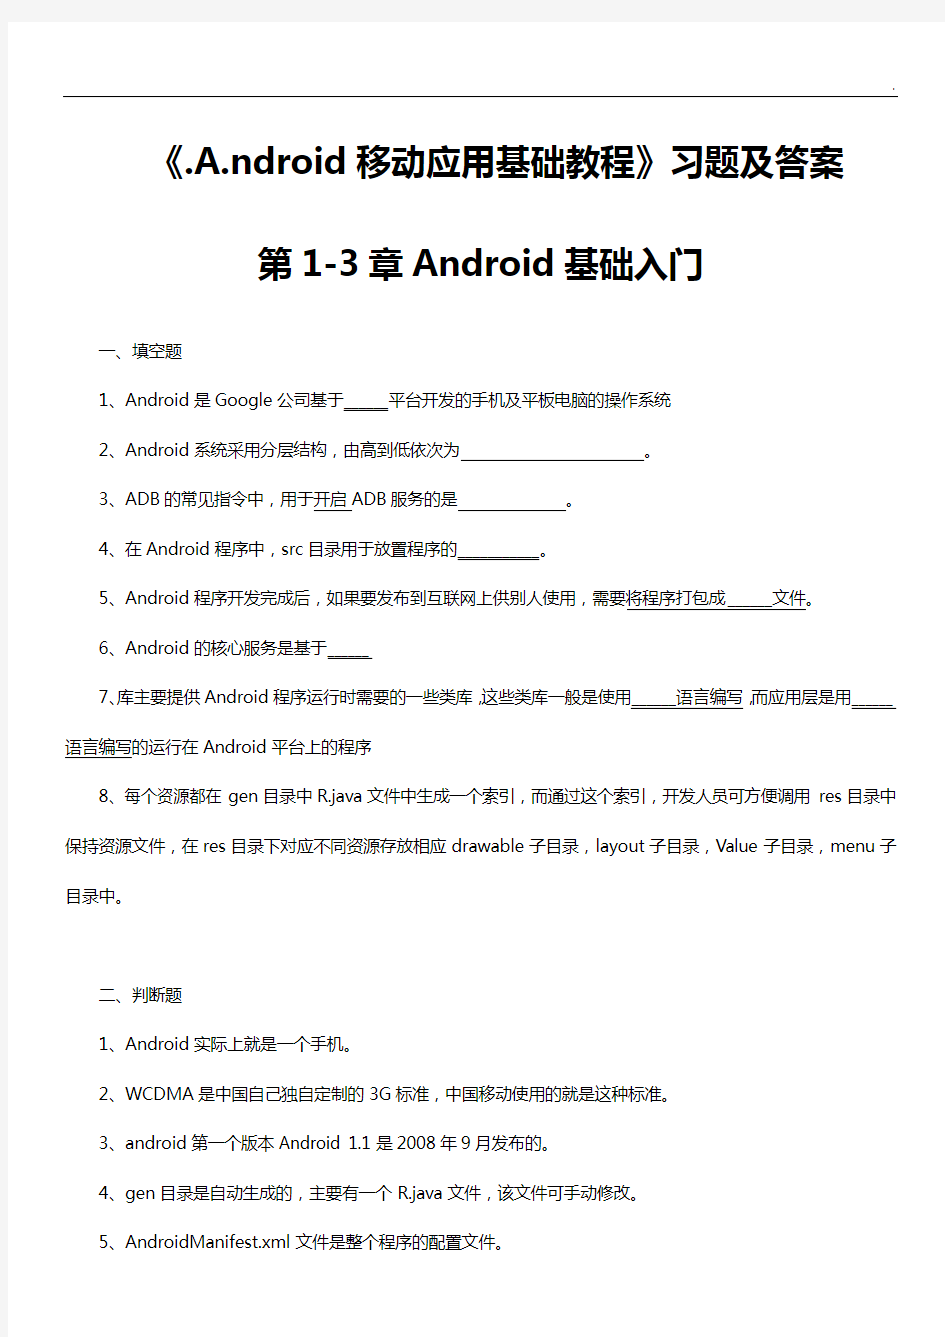 《Android移动开发知识题2.0